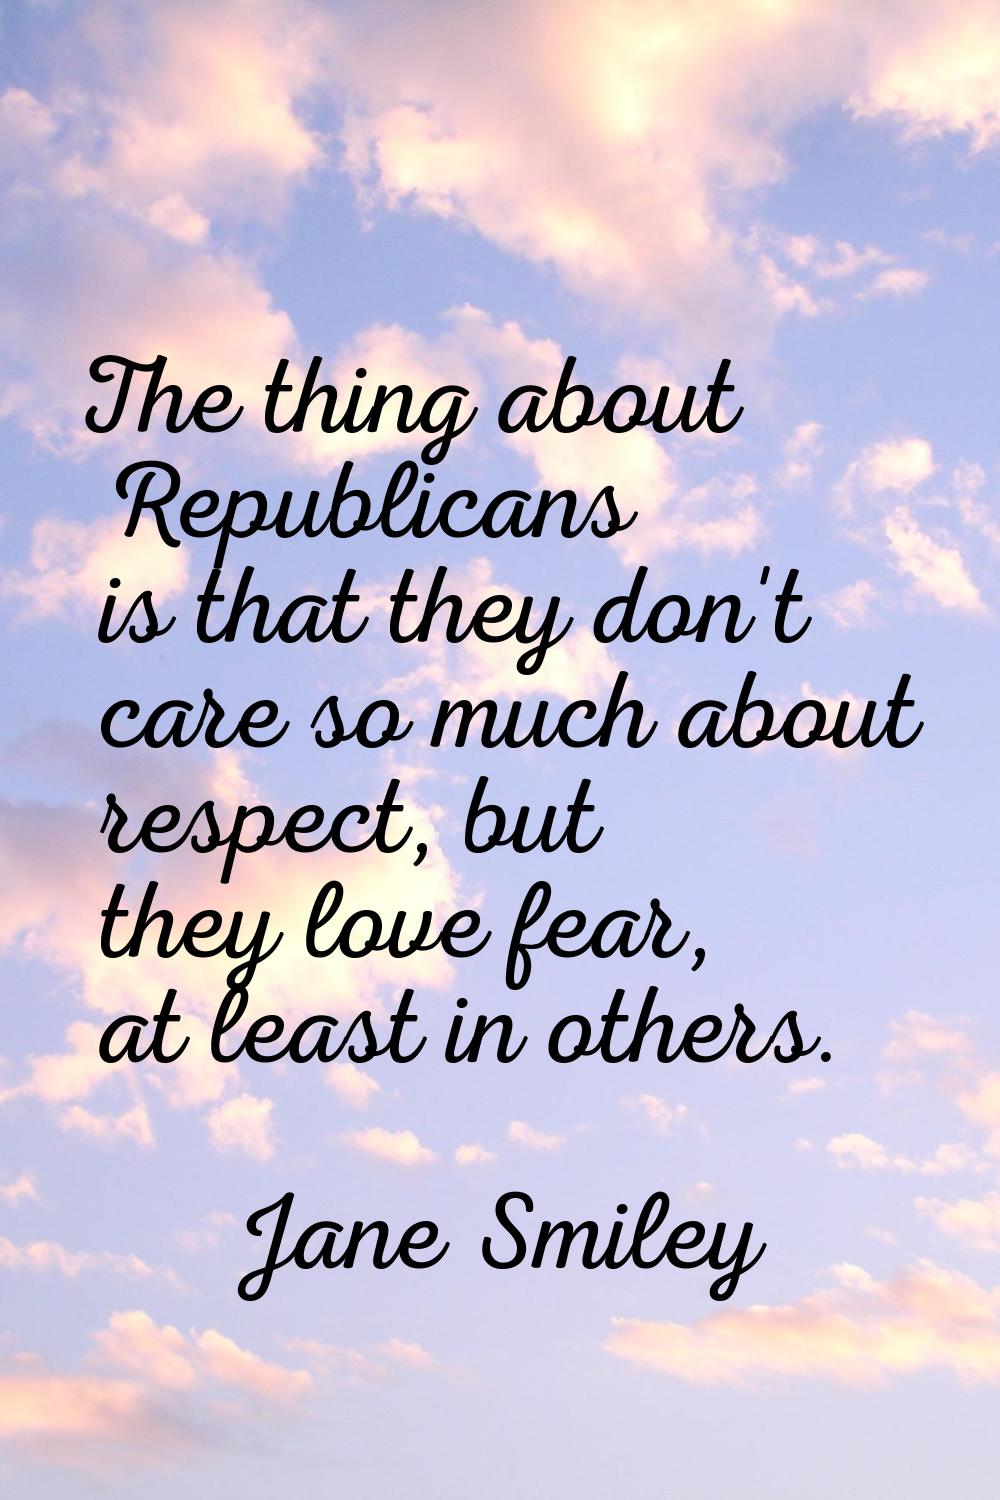 The thing about Republicans is that they don't care so much about respect, but they love fear, at l